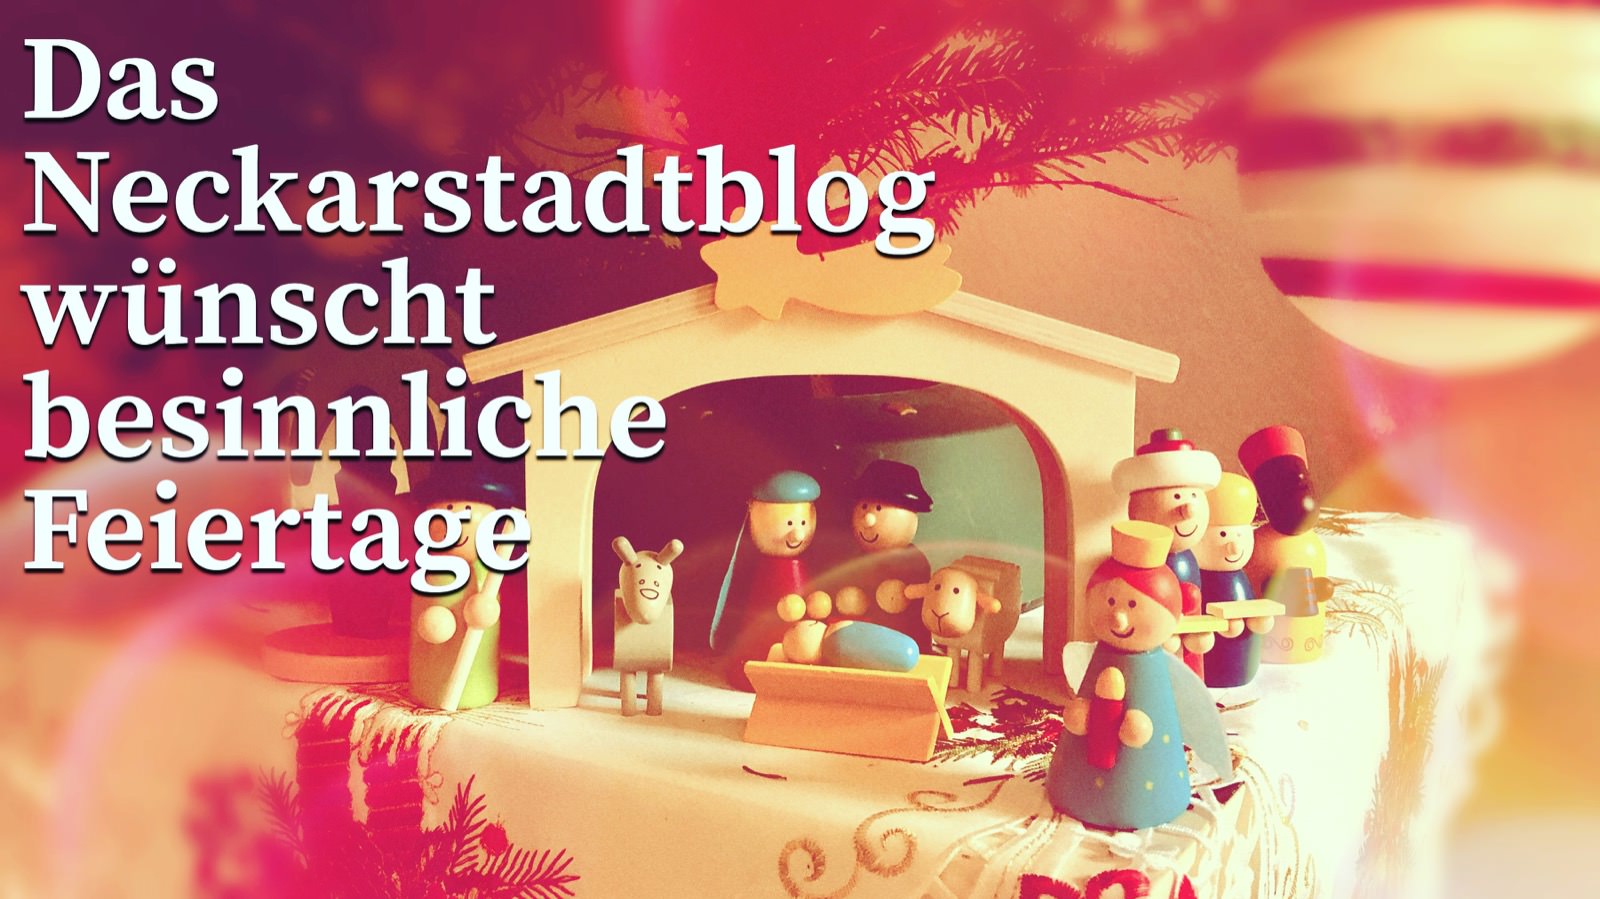 frohes fest 2018 - Frohe Feiertage!